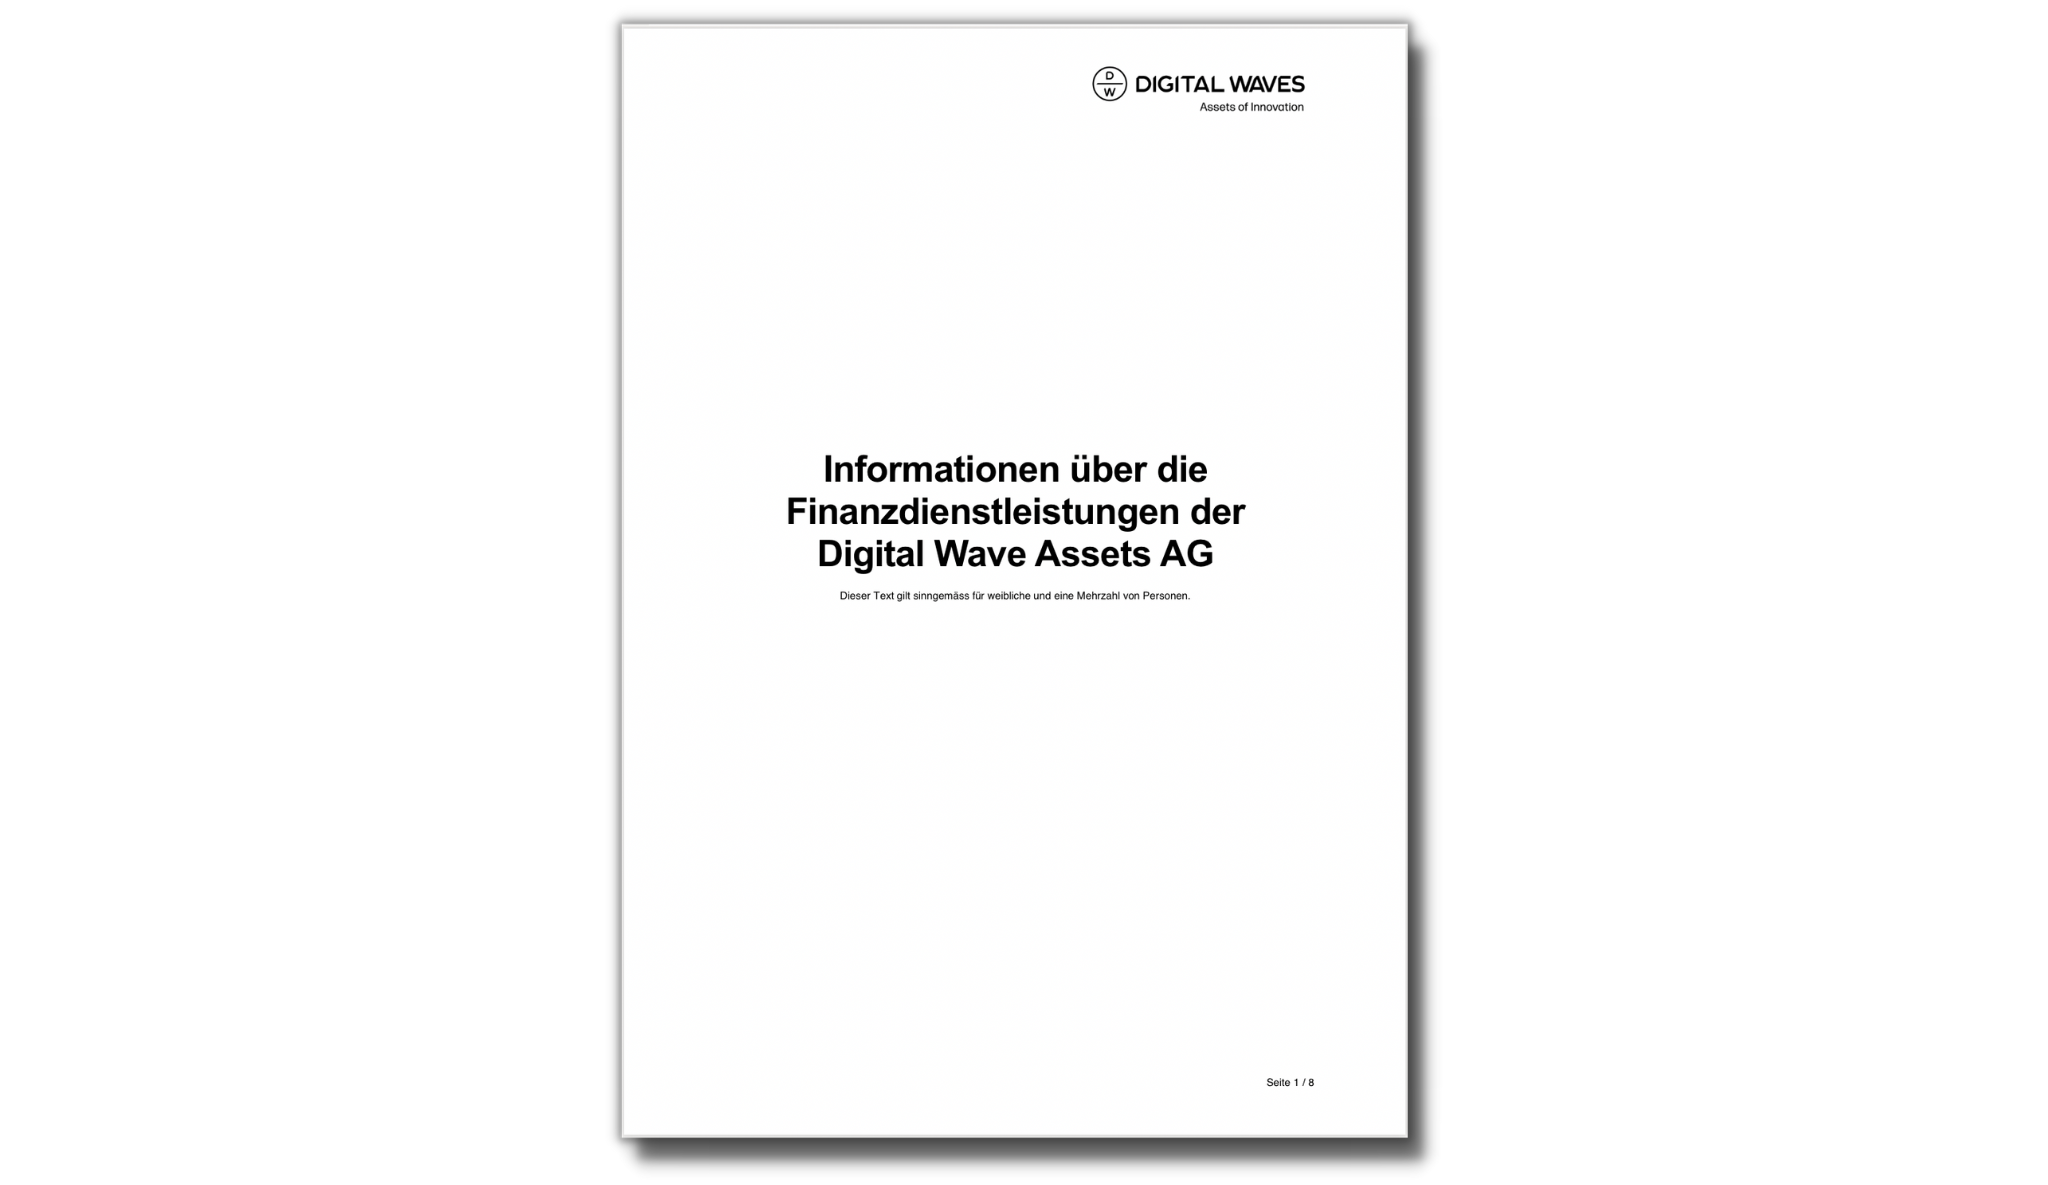 Information on the financial service and the financial instruments provided by Digital Waves (German only)